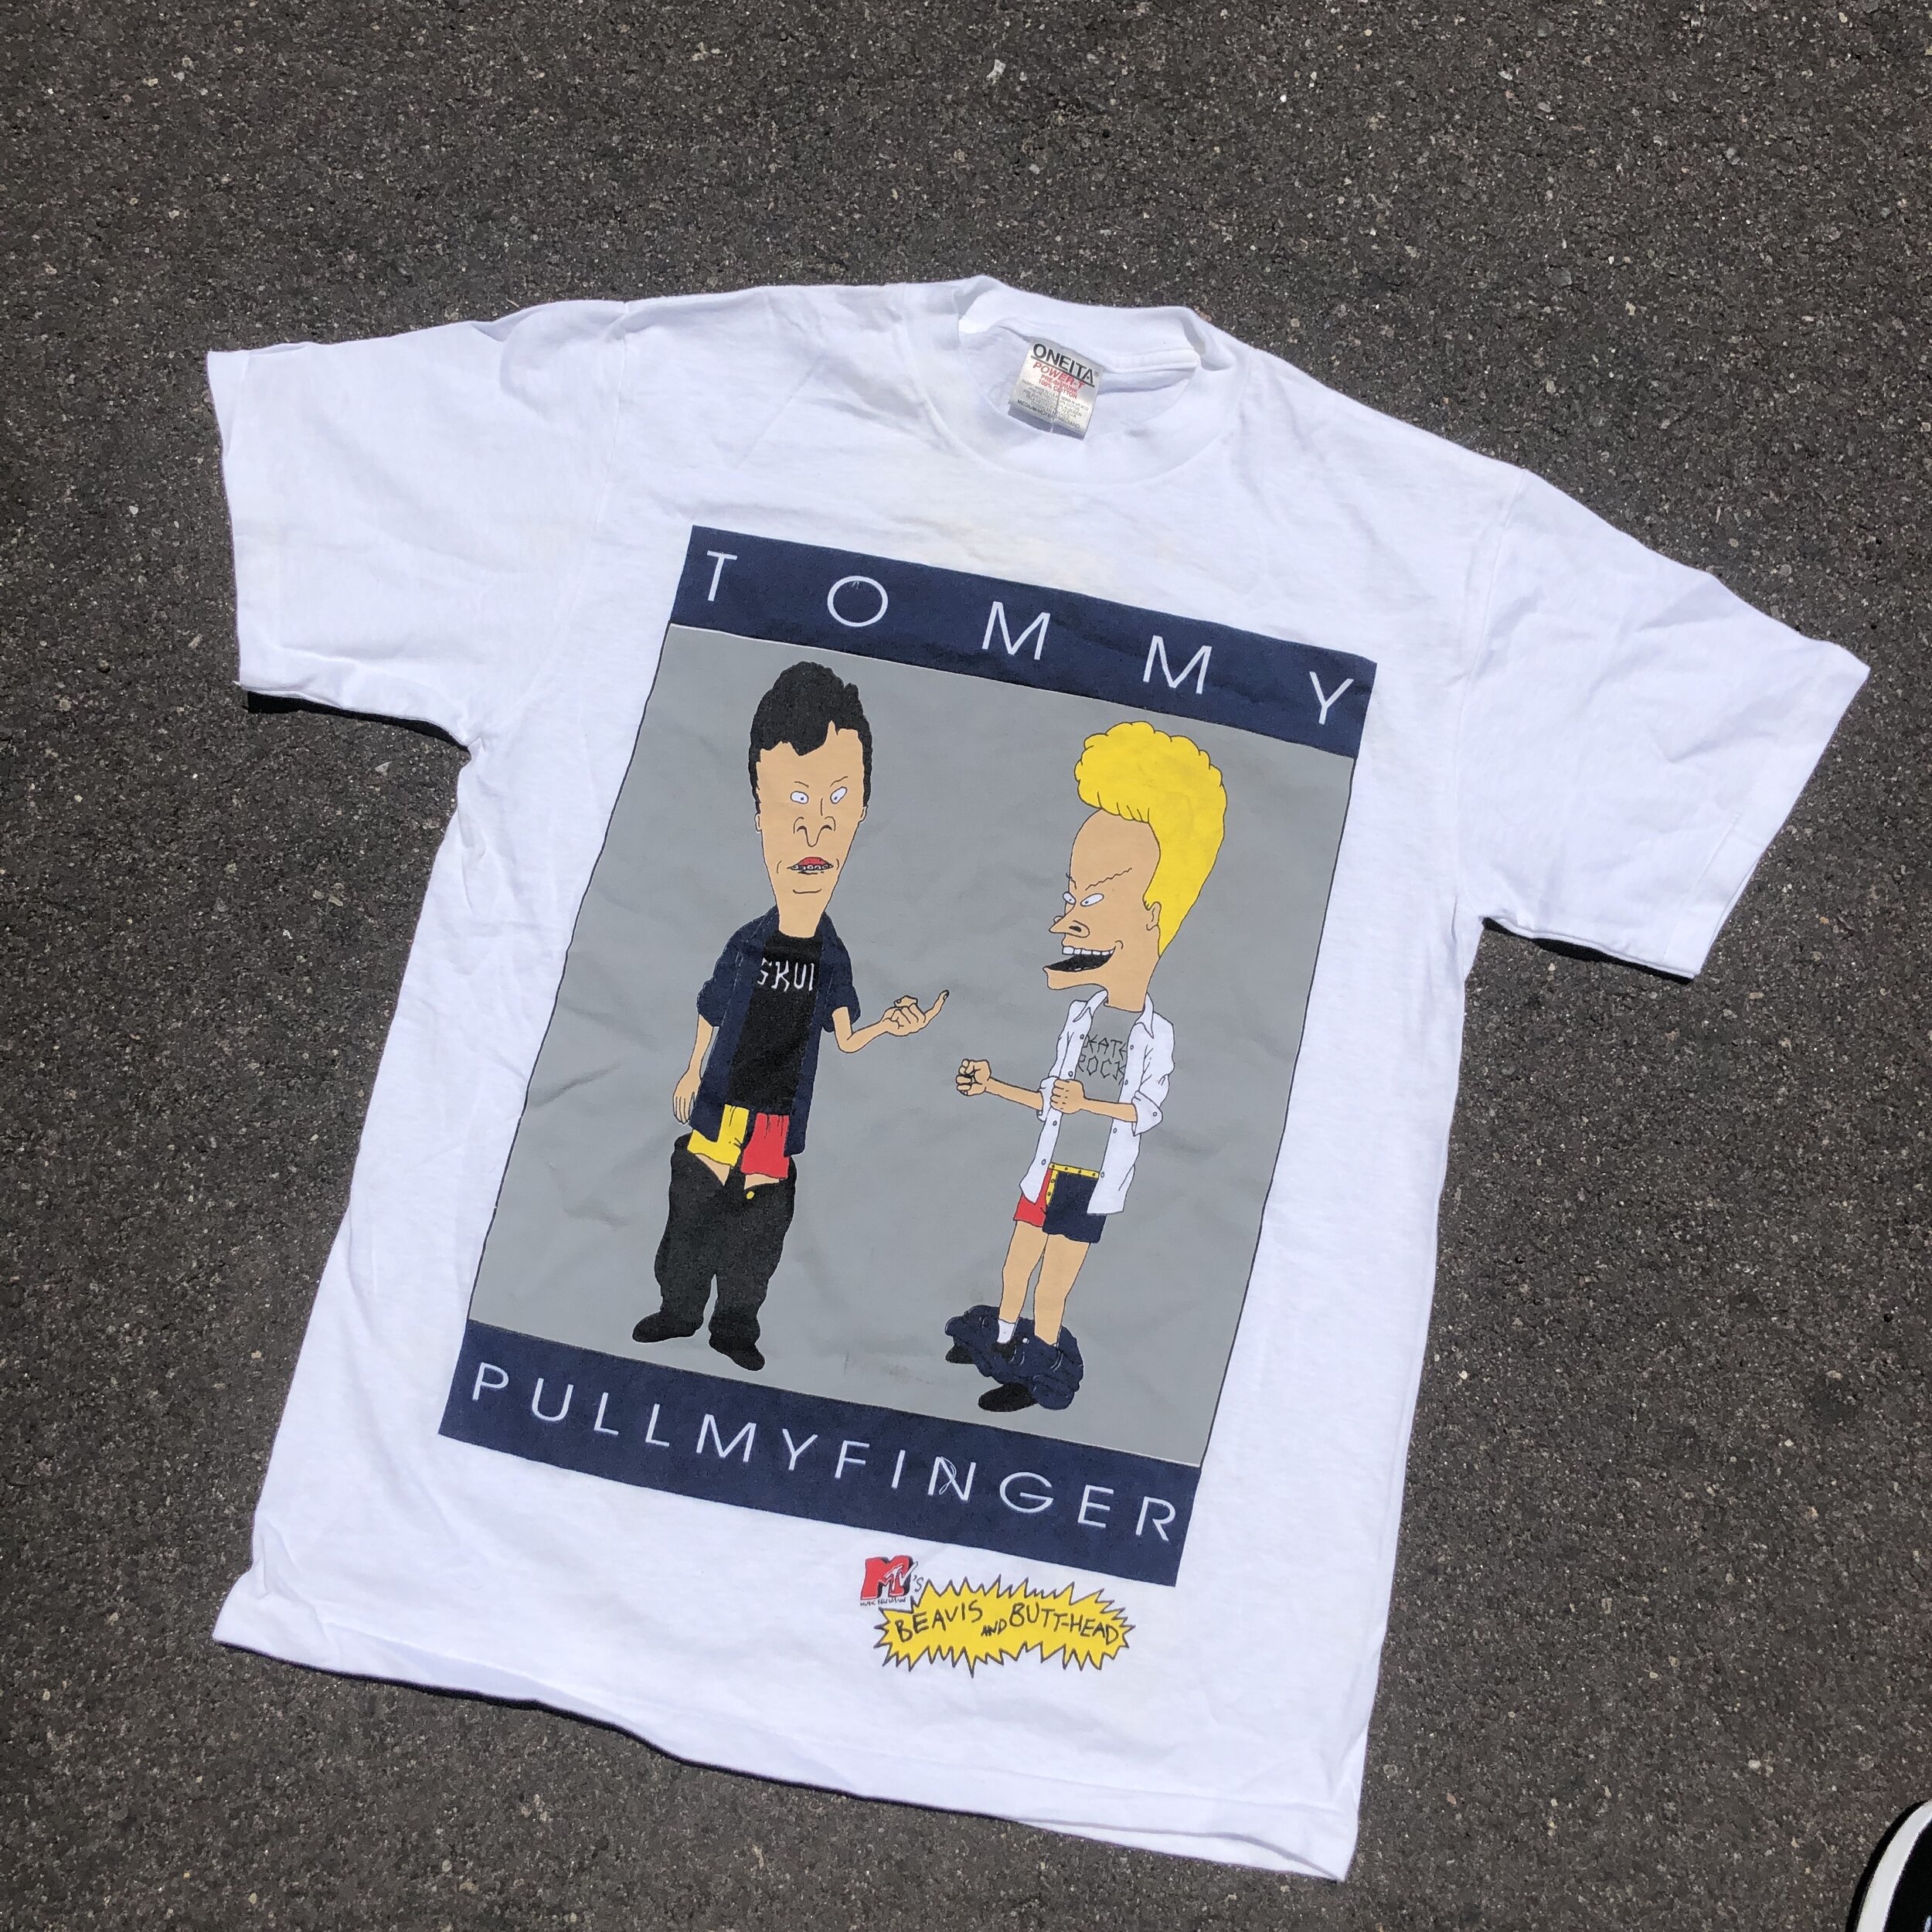 tommy pull my finger shirt